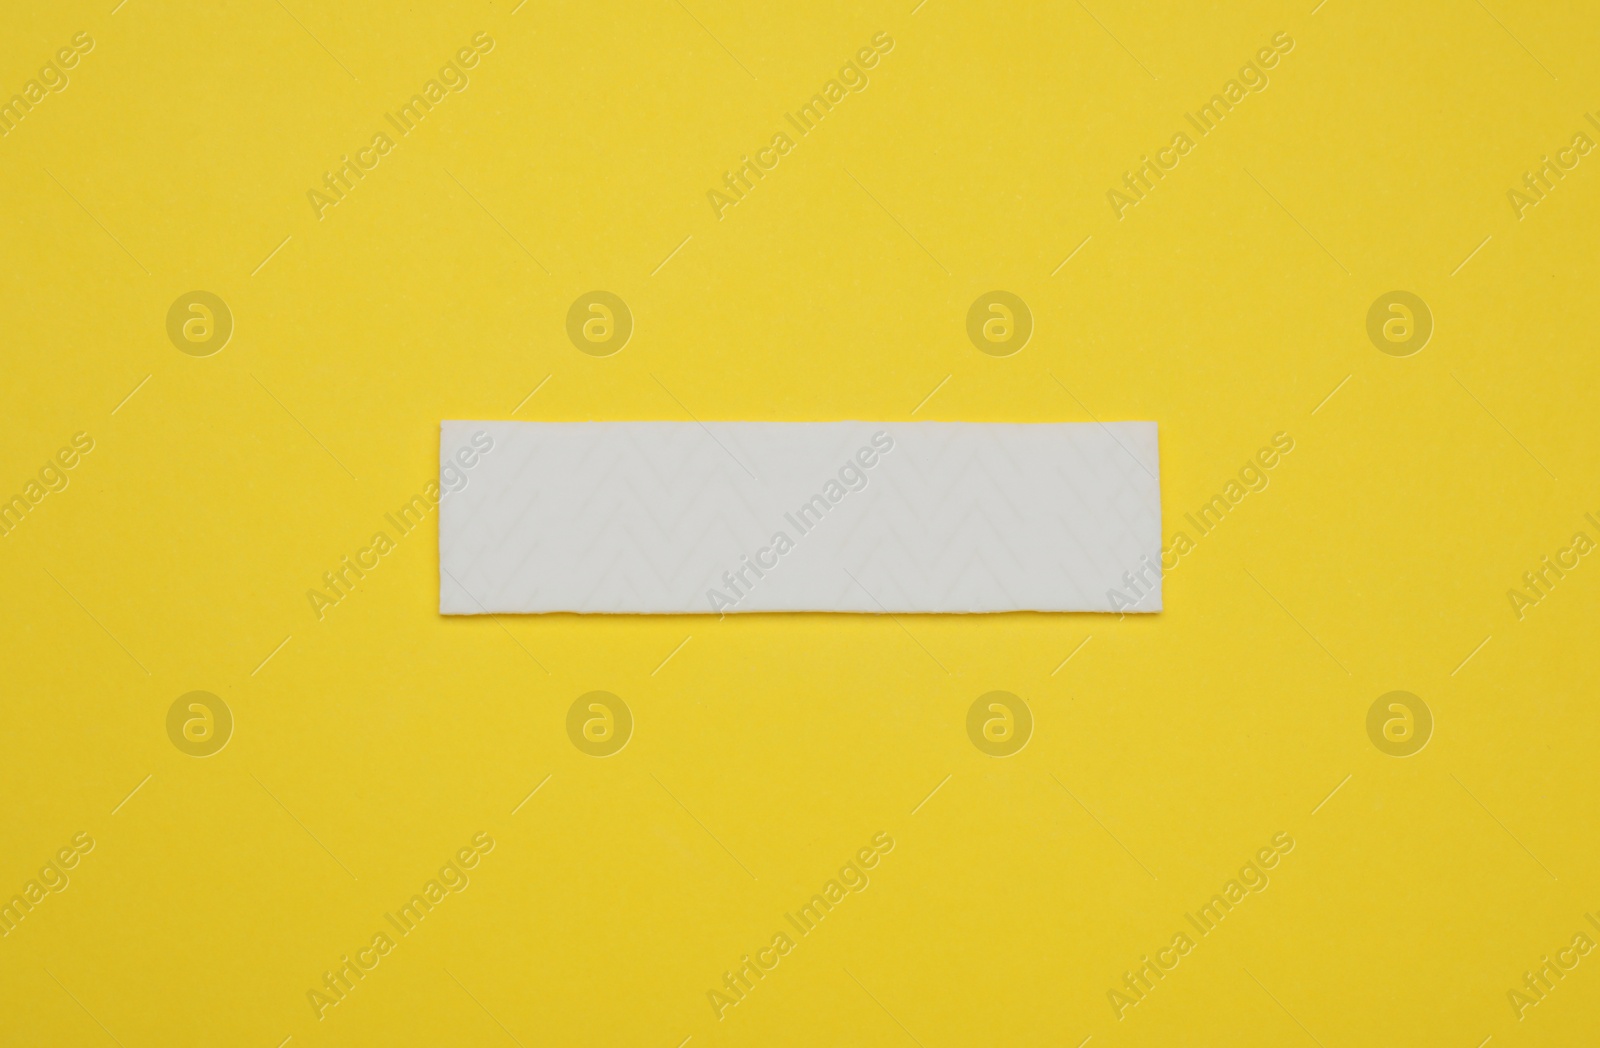 Photo of Stick of tasty chewing gum on yellow background, top view